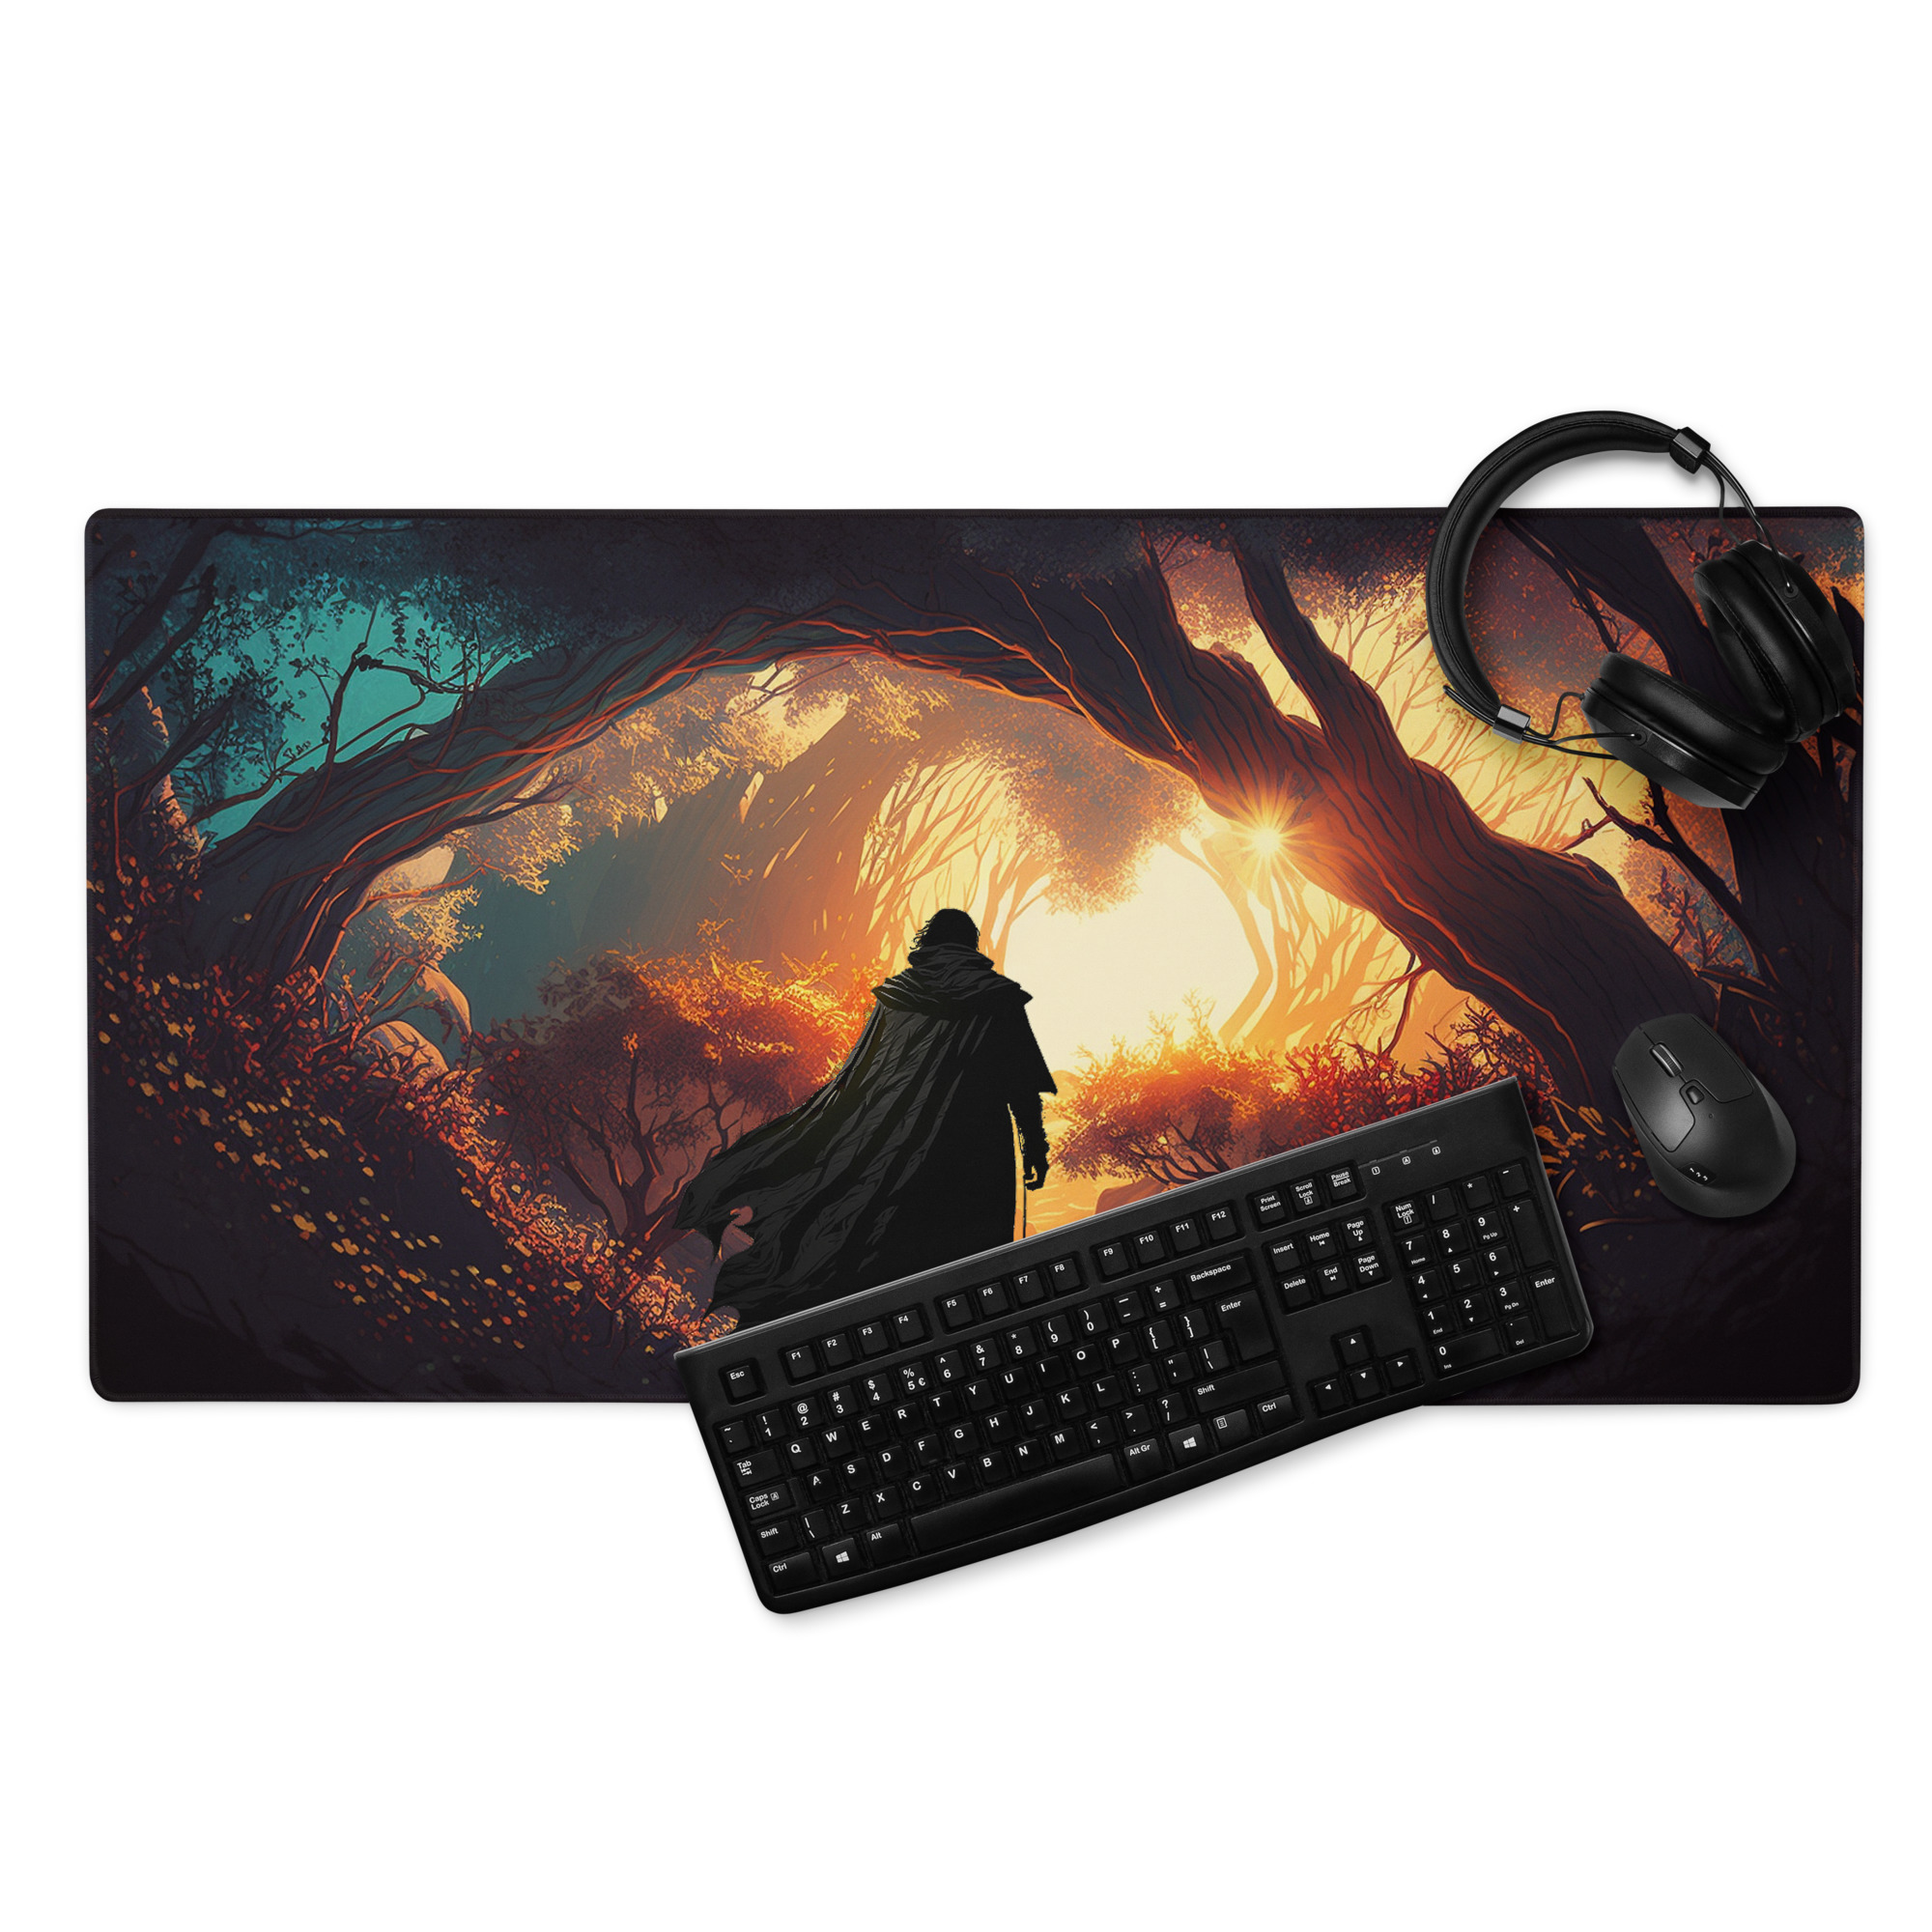 Traveler In Black Wanders Out Of The Deep Forest At Sunrise | Fantasy Artwork | Gaming mouse pad 36 in. x 18 in.